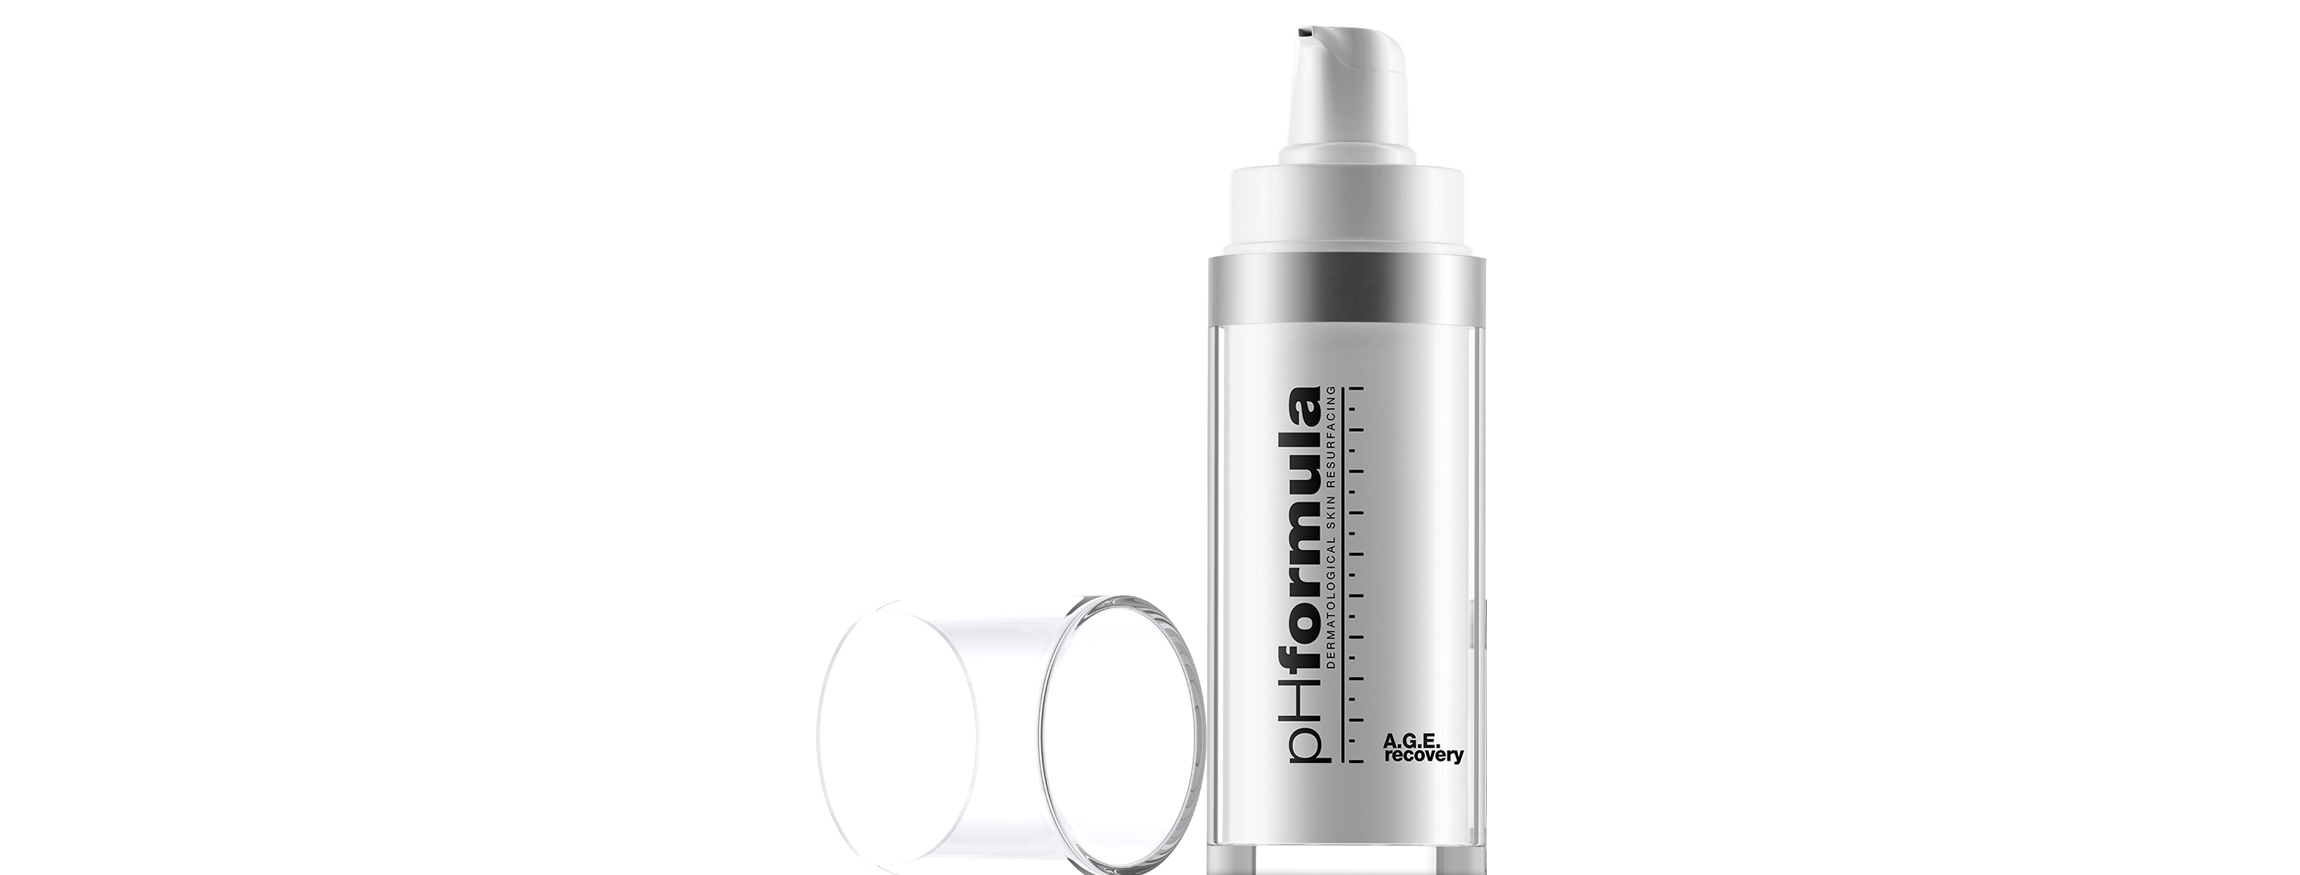 Innovative, exciting and highly effective anti-ageing solutions